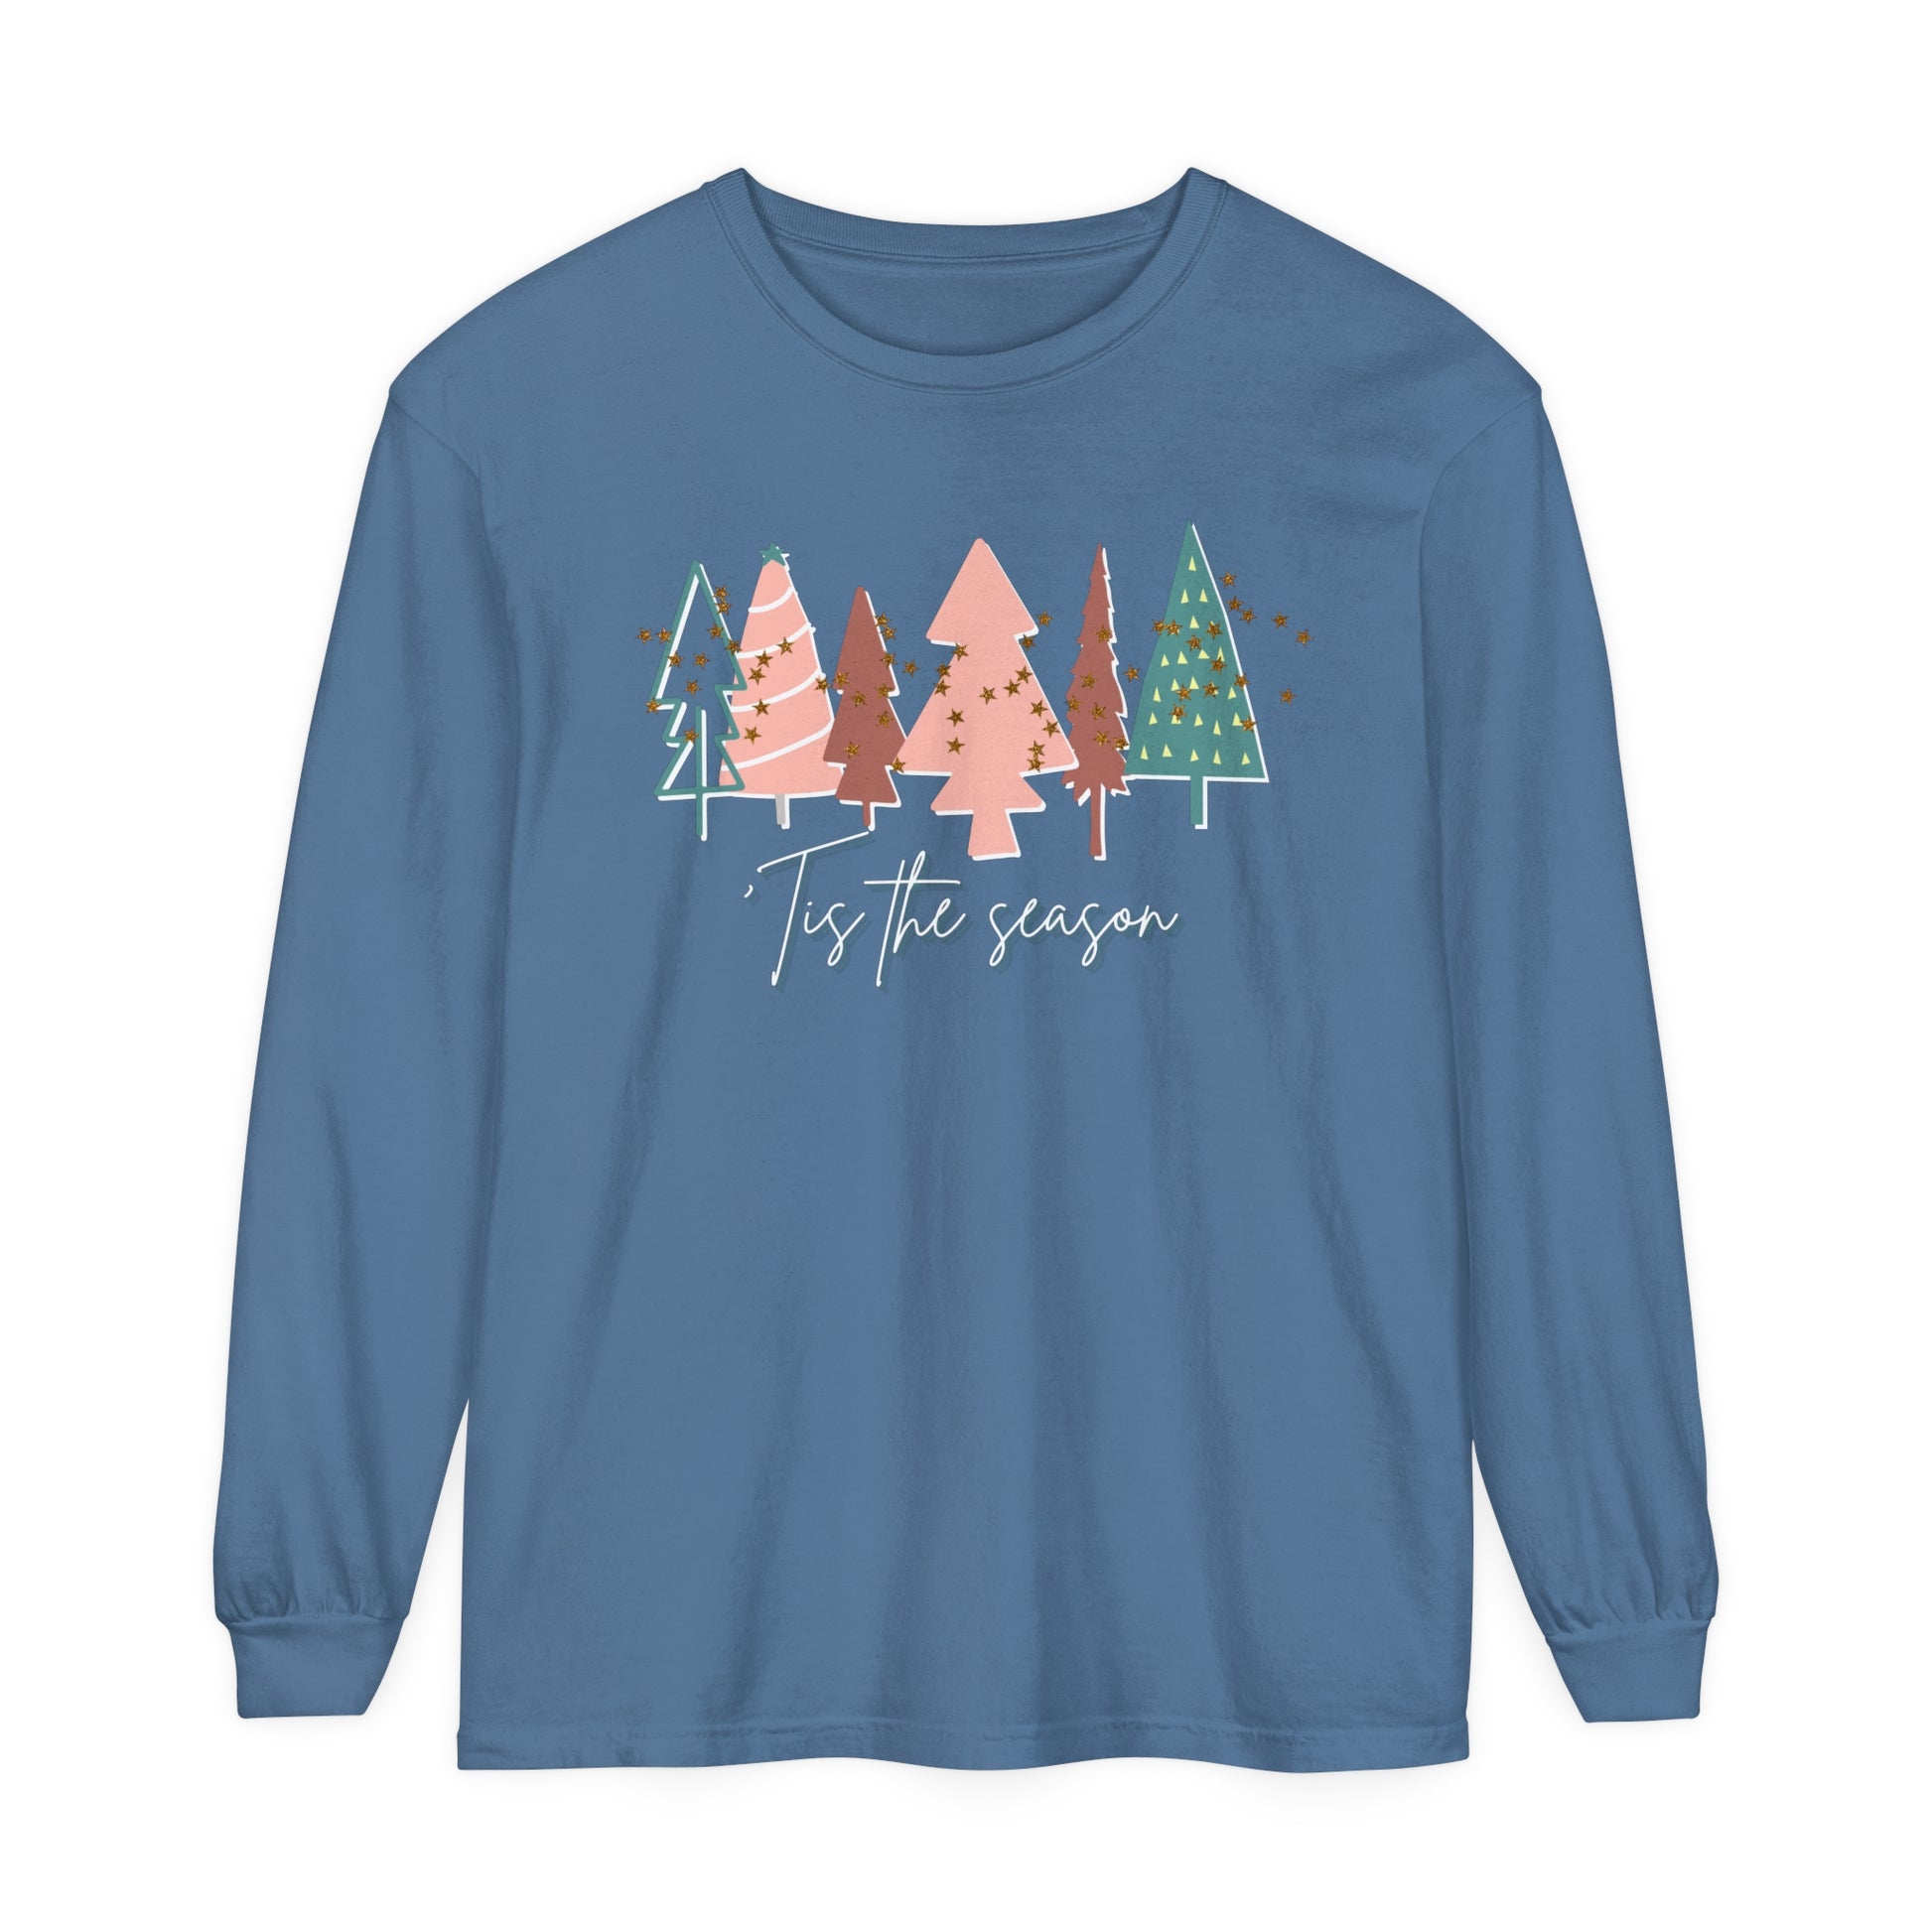 Christmas T-Shirt "Tis the Season Christmas Tree Shirt" by Comfort Colors, perfect for adding to your winter wardrobe with comfort and style, from Printify.